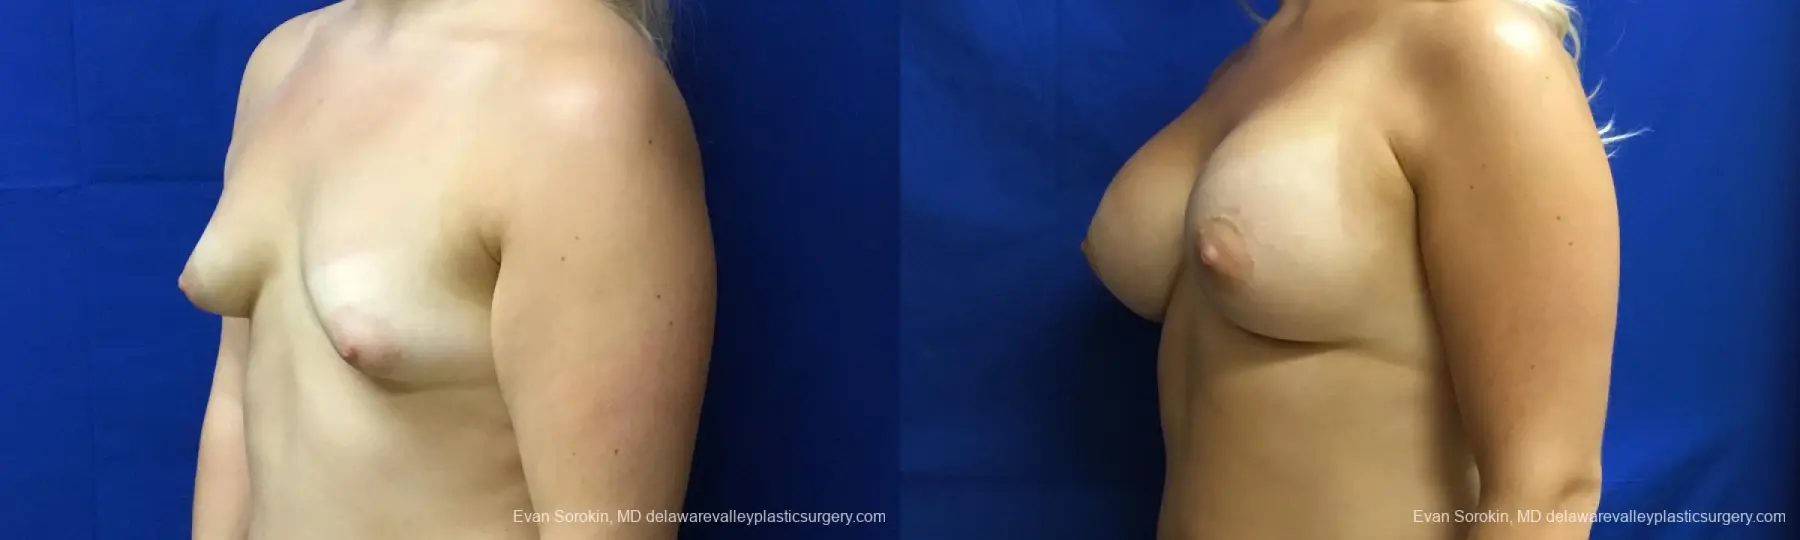 Philadelphia Breast Augmentation 12517 - Before and After 3